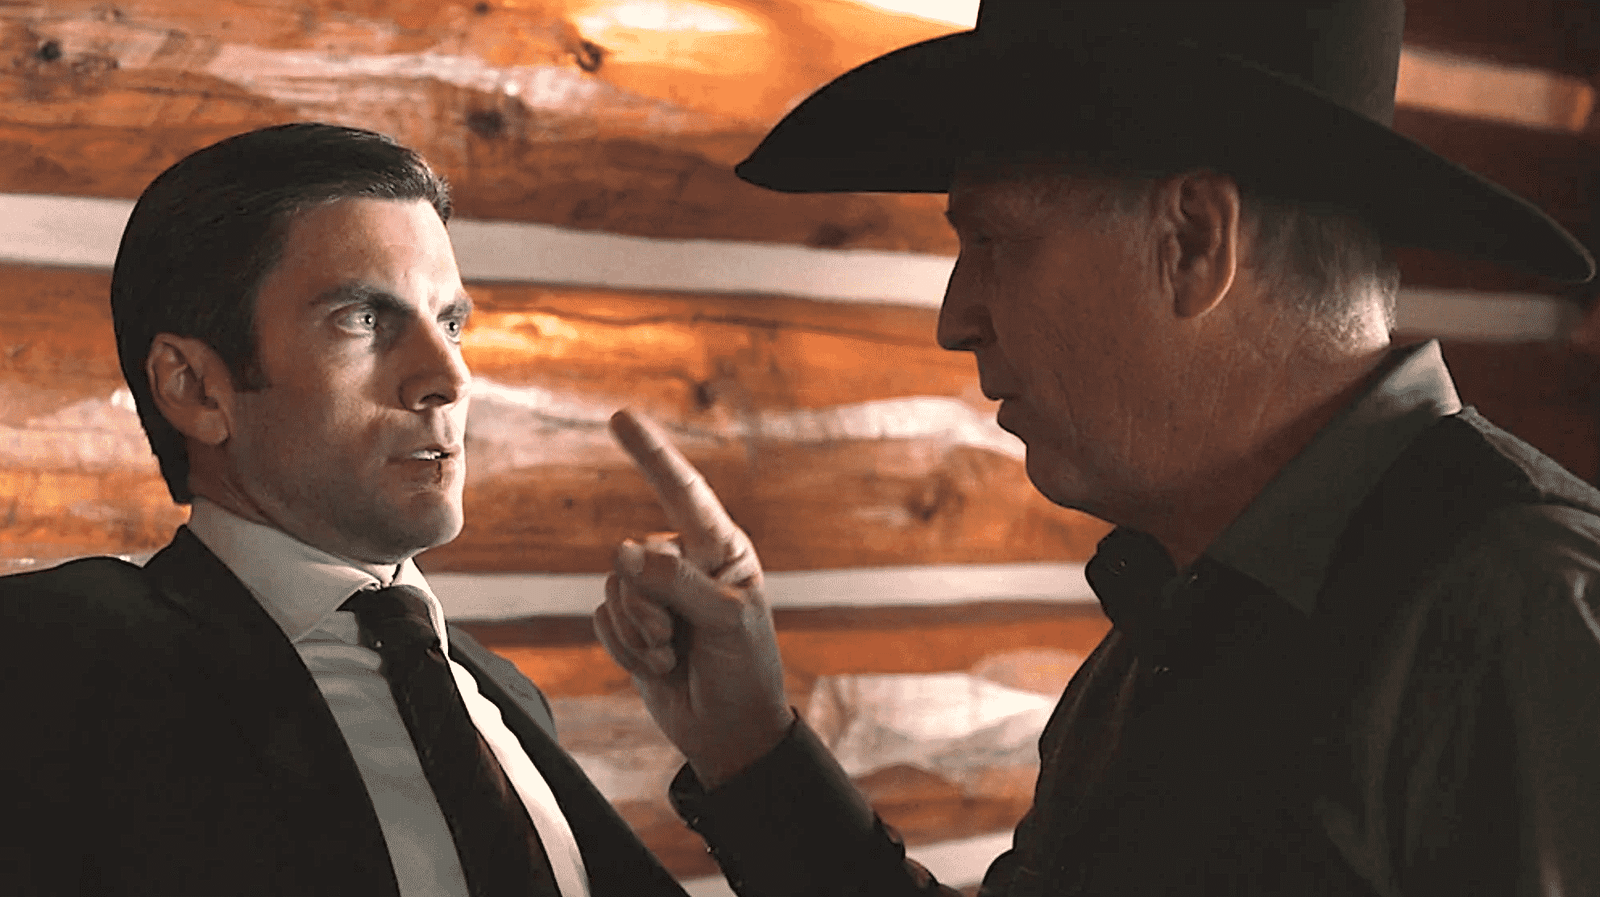 Yellowstone Jamie Dutton, played by Wes Bentley